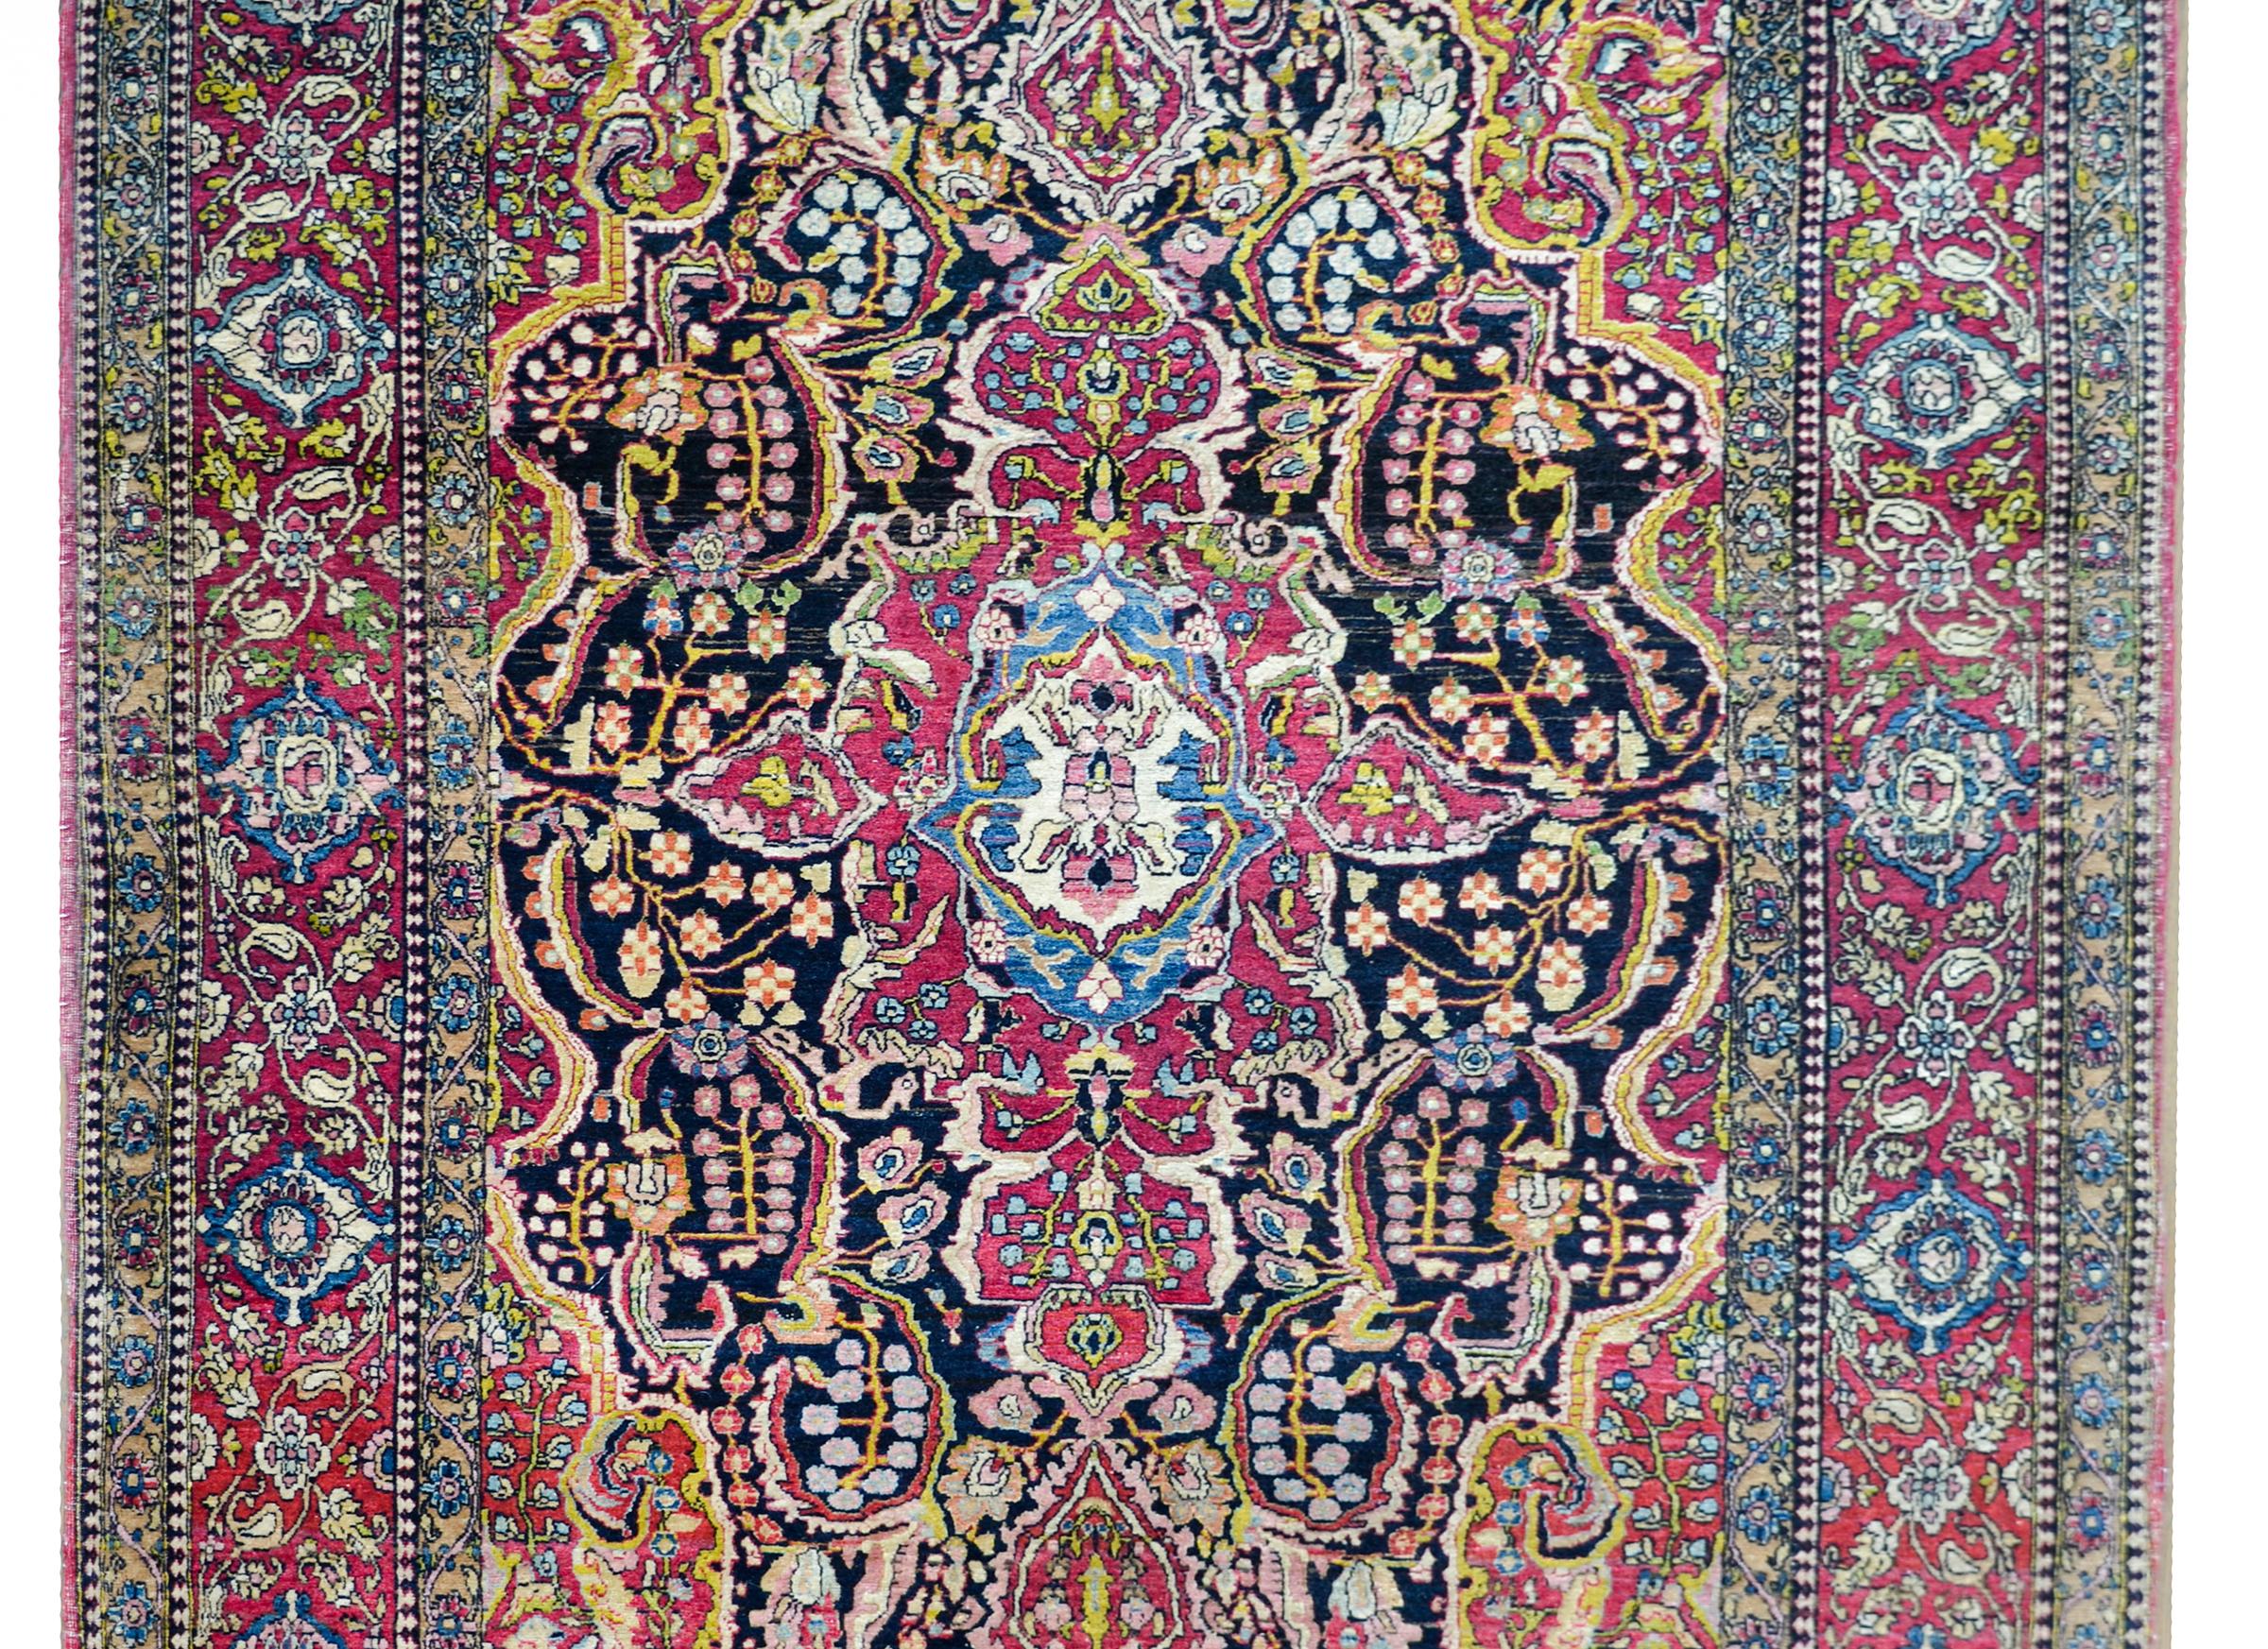 An incredible late 19th century Persian Isfahan rug with a rather large central medallion containing myriad stylized flowers, flowering branches, vines, and leaves, woven in brilliant cranberry, indigo, gold, green, and white colors. The border is